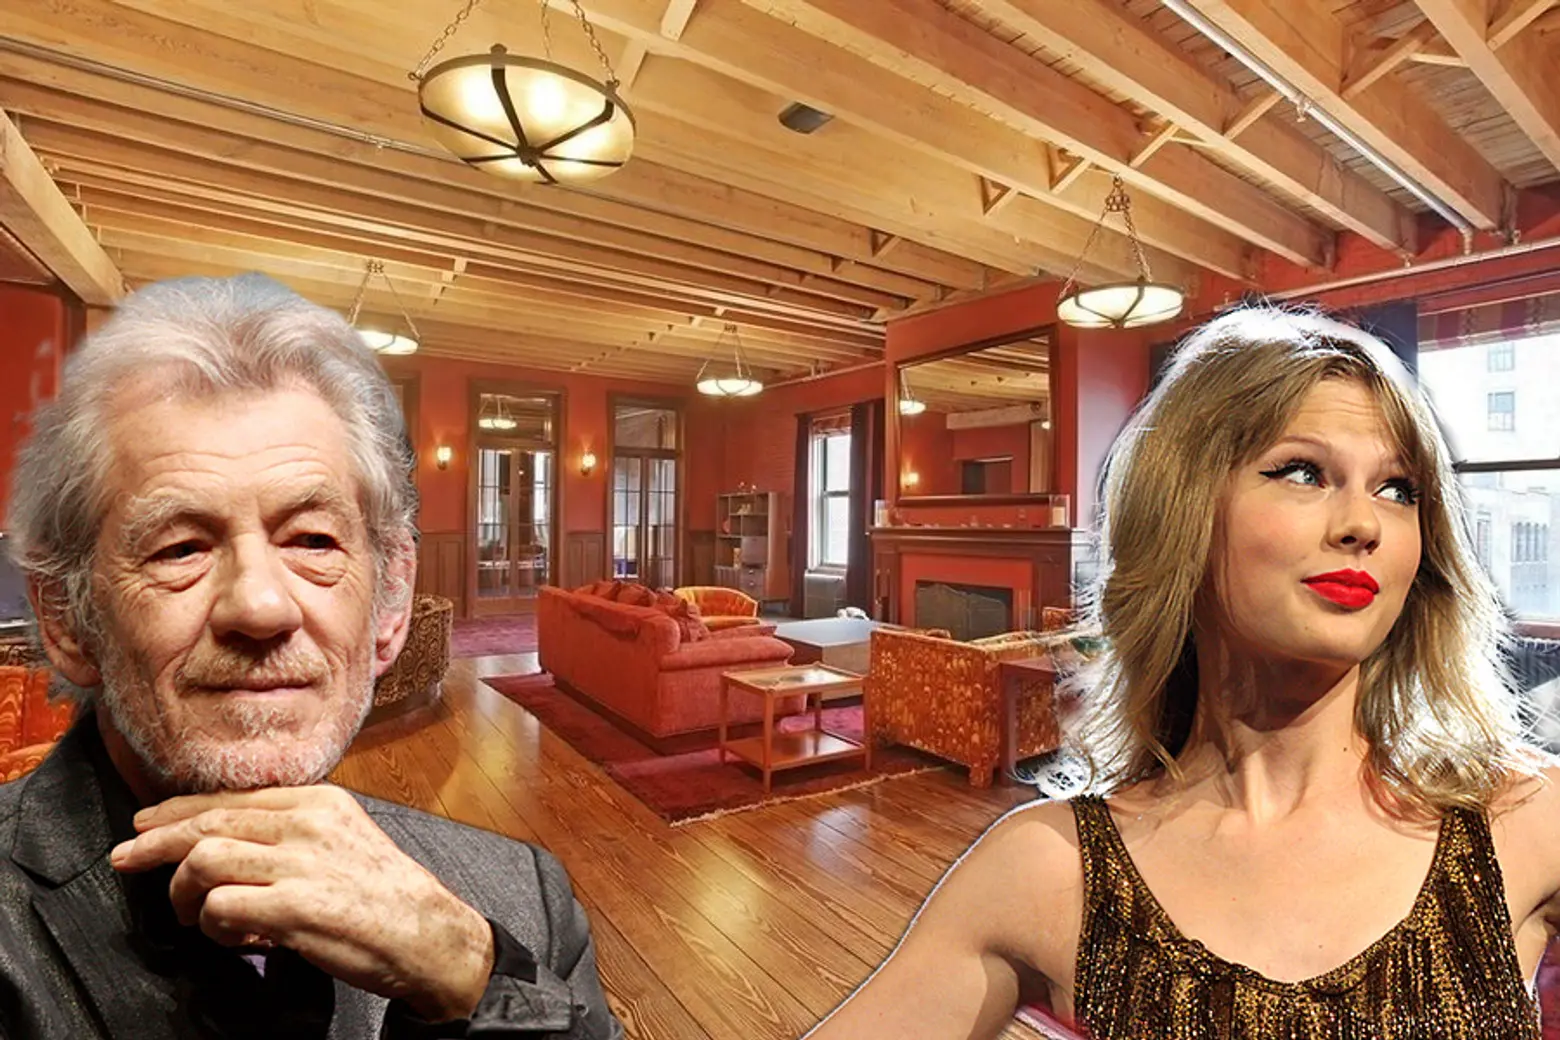 Taylor Swift May Be the Reason Sir Ian McKellen Got Evicted From His Tribeca Apartment